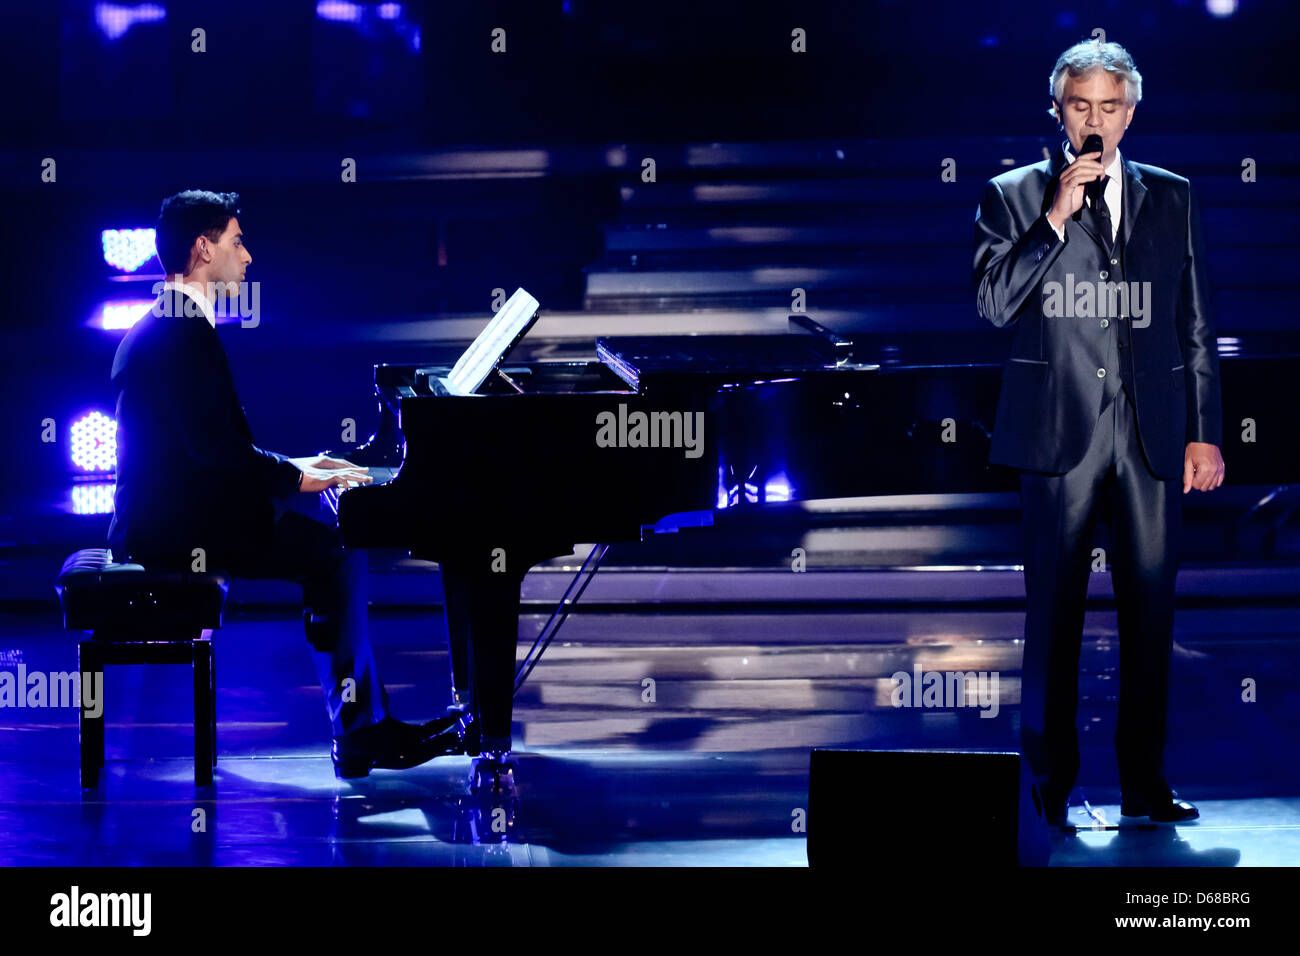 Andrea Bocelli & his son Amos (on piano) - Love Me Tender - live on  German TV, April 13, 2013 